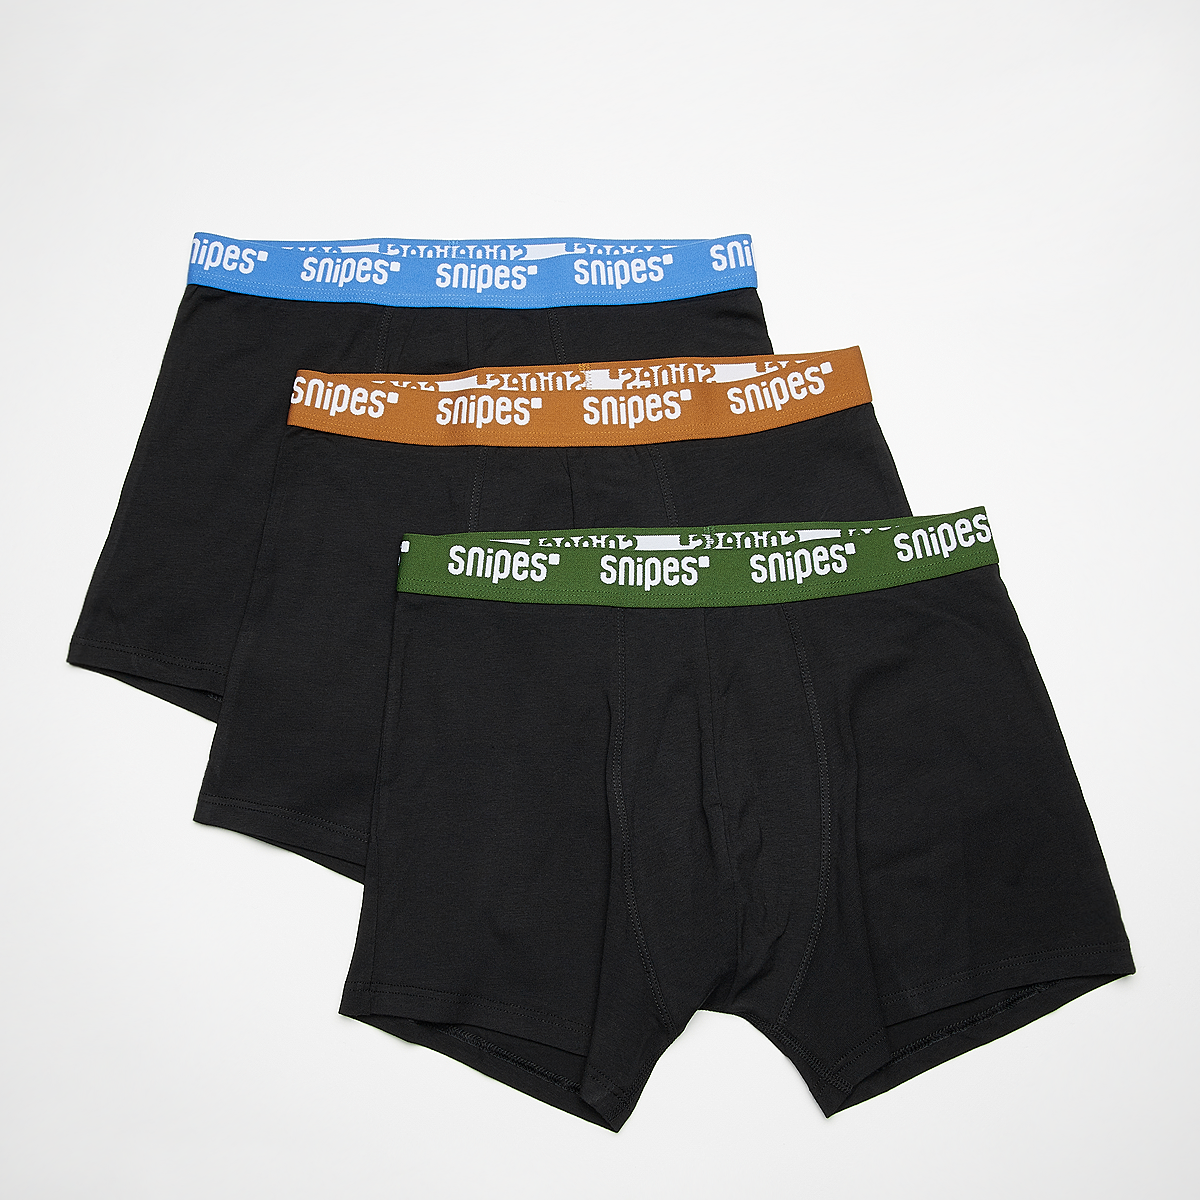 Contrast Tape Briefs Boxershorts (3 Pack) product